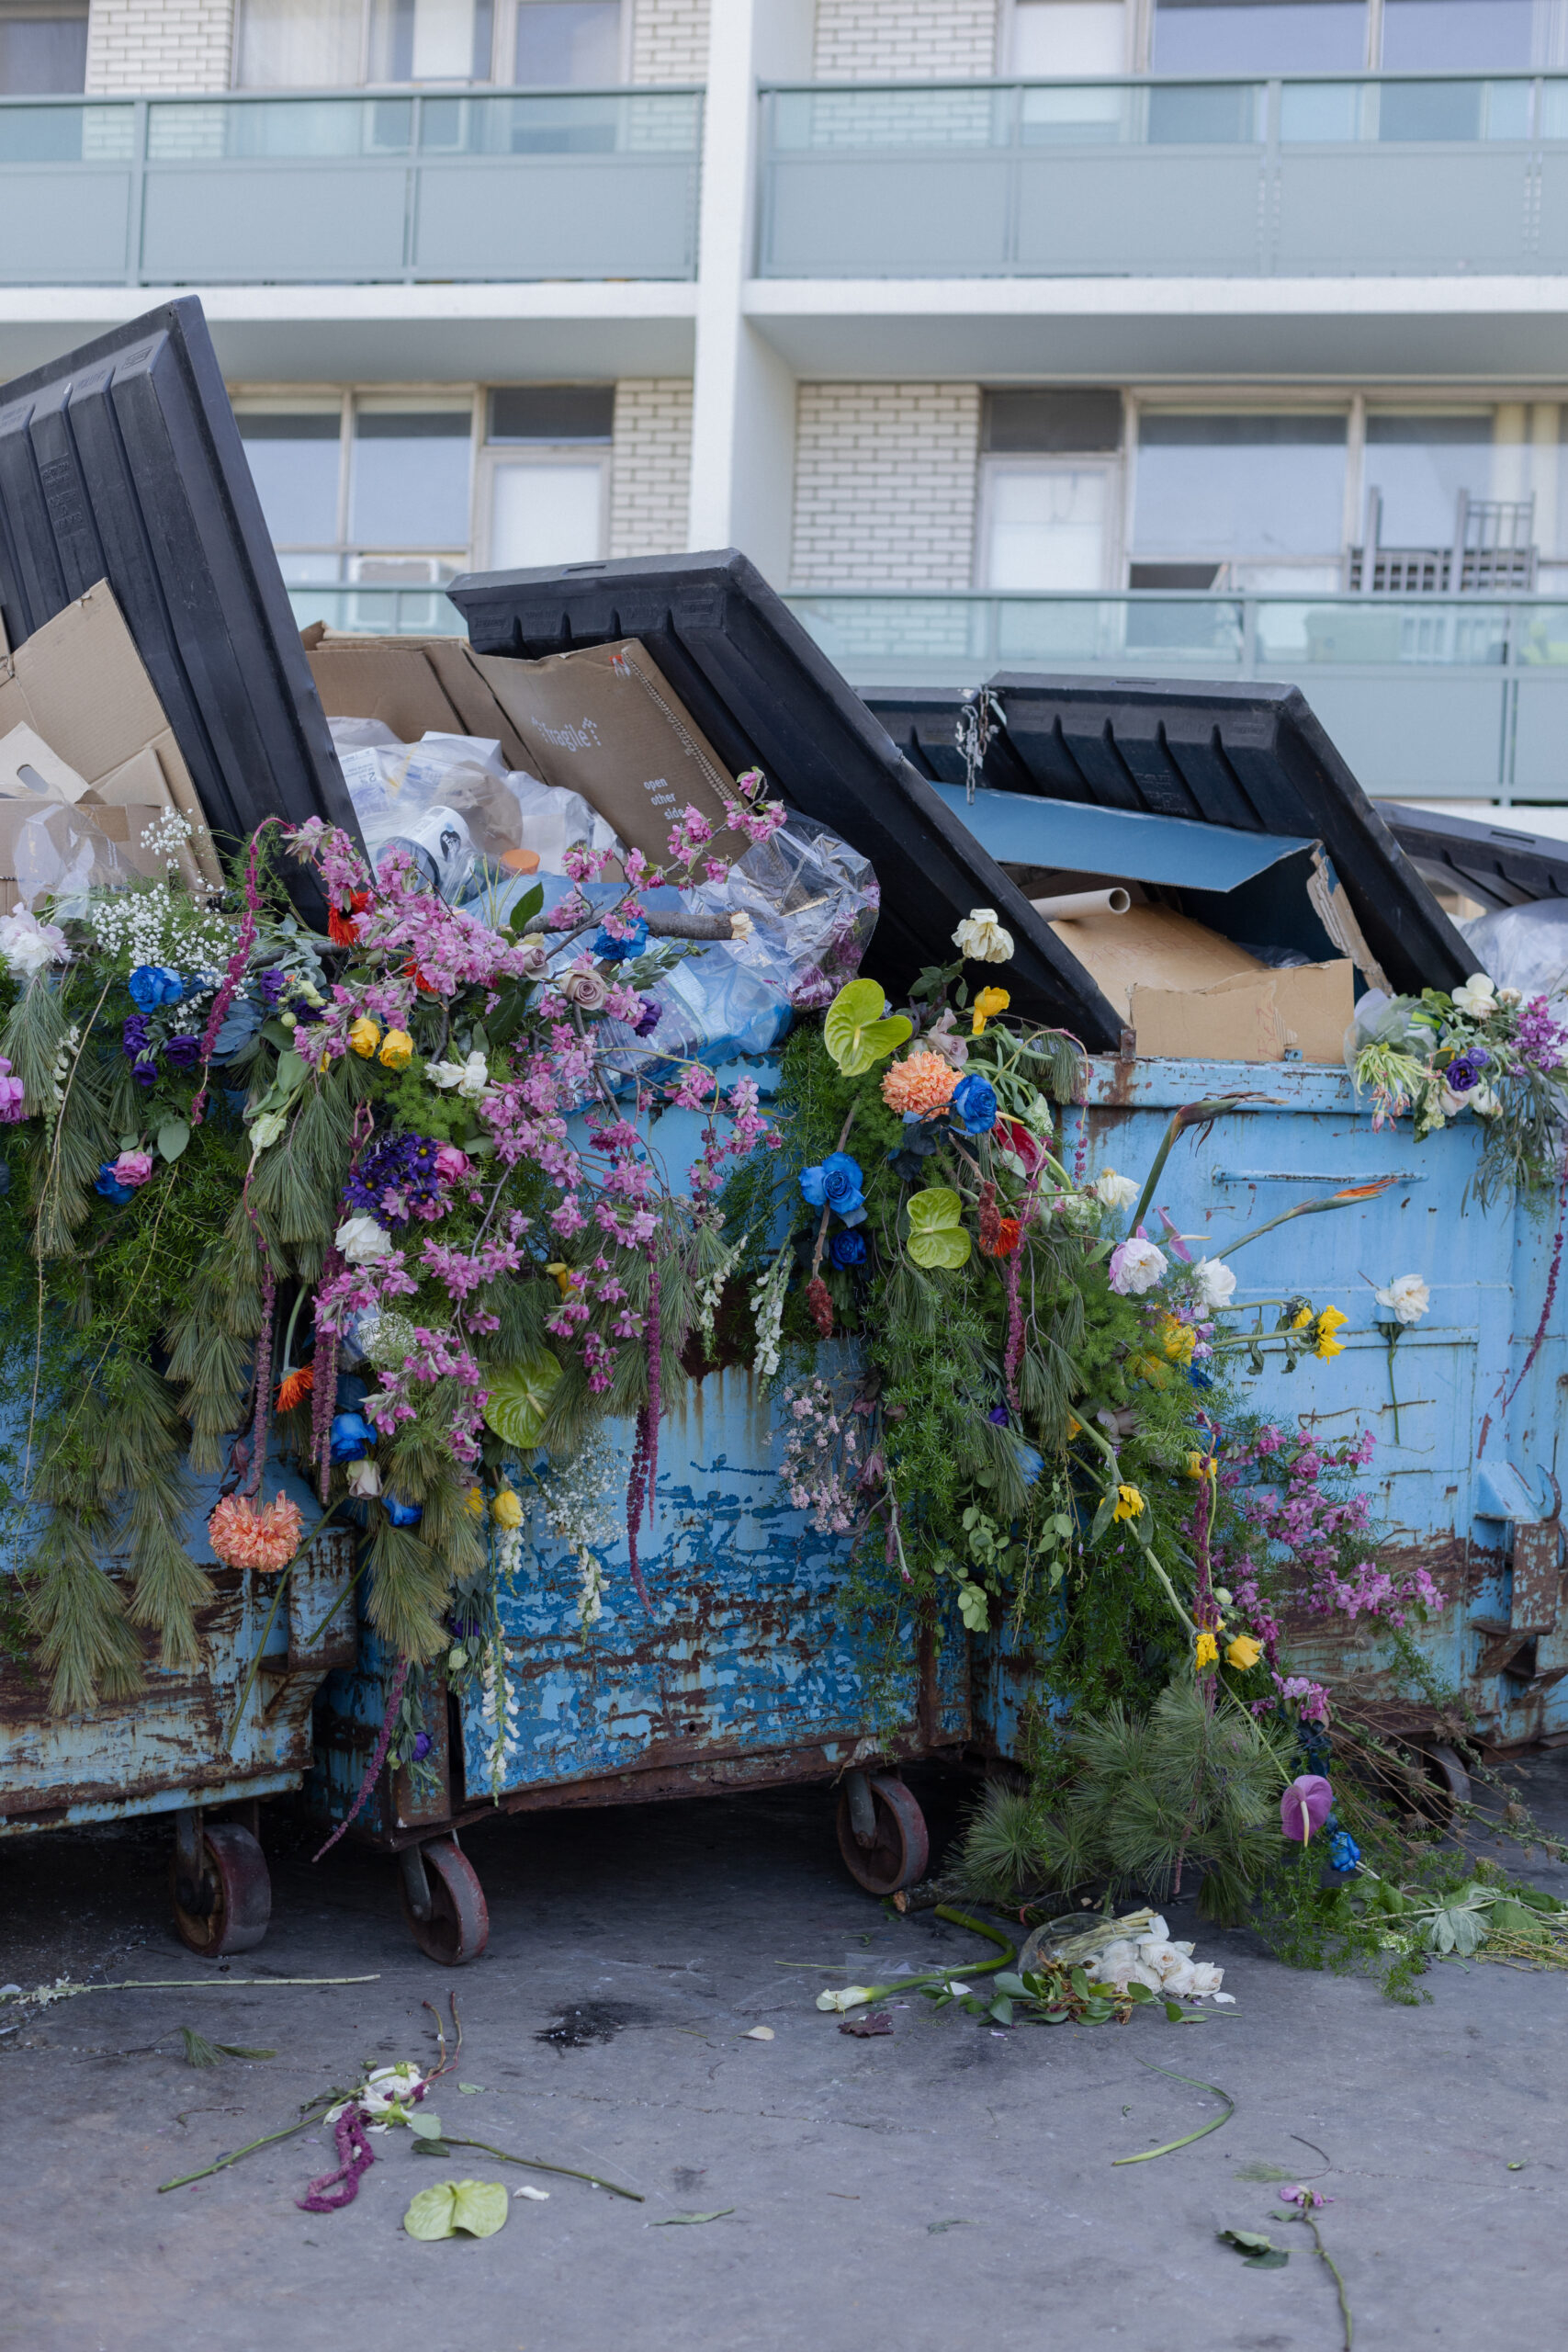     Marie-Pier Guillot & Mimosa Haque, Garbage Day of Mourning, 2021

